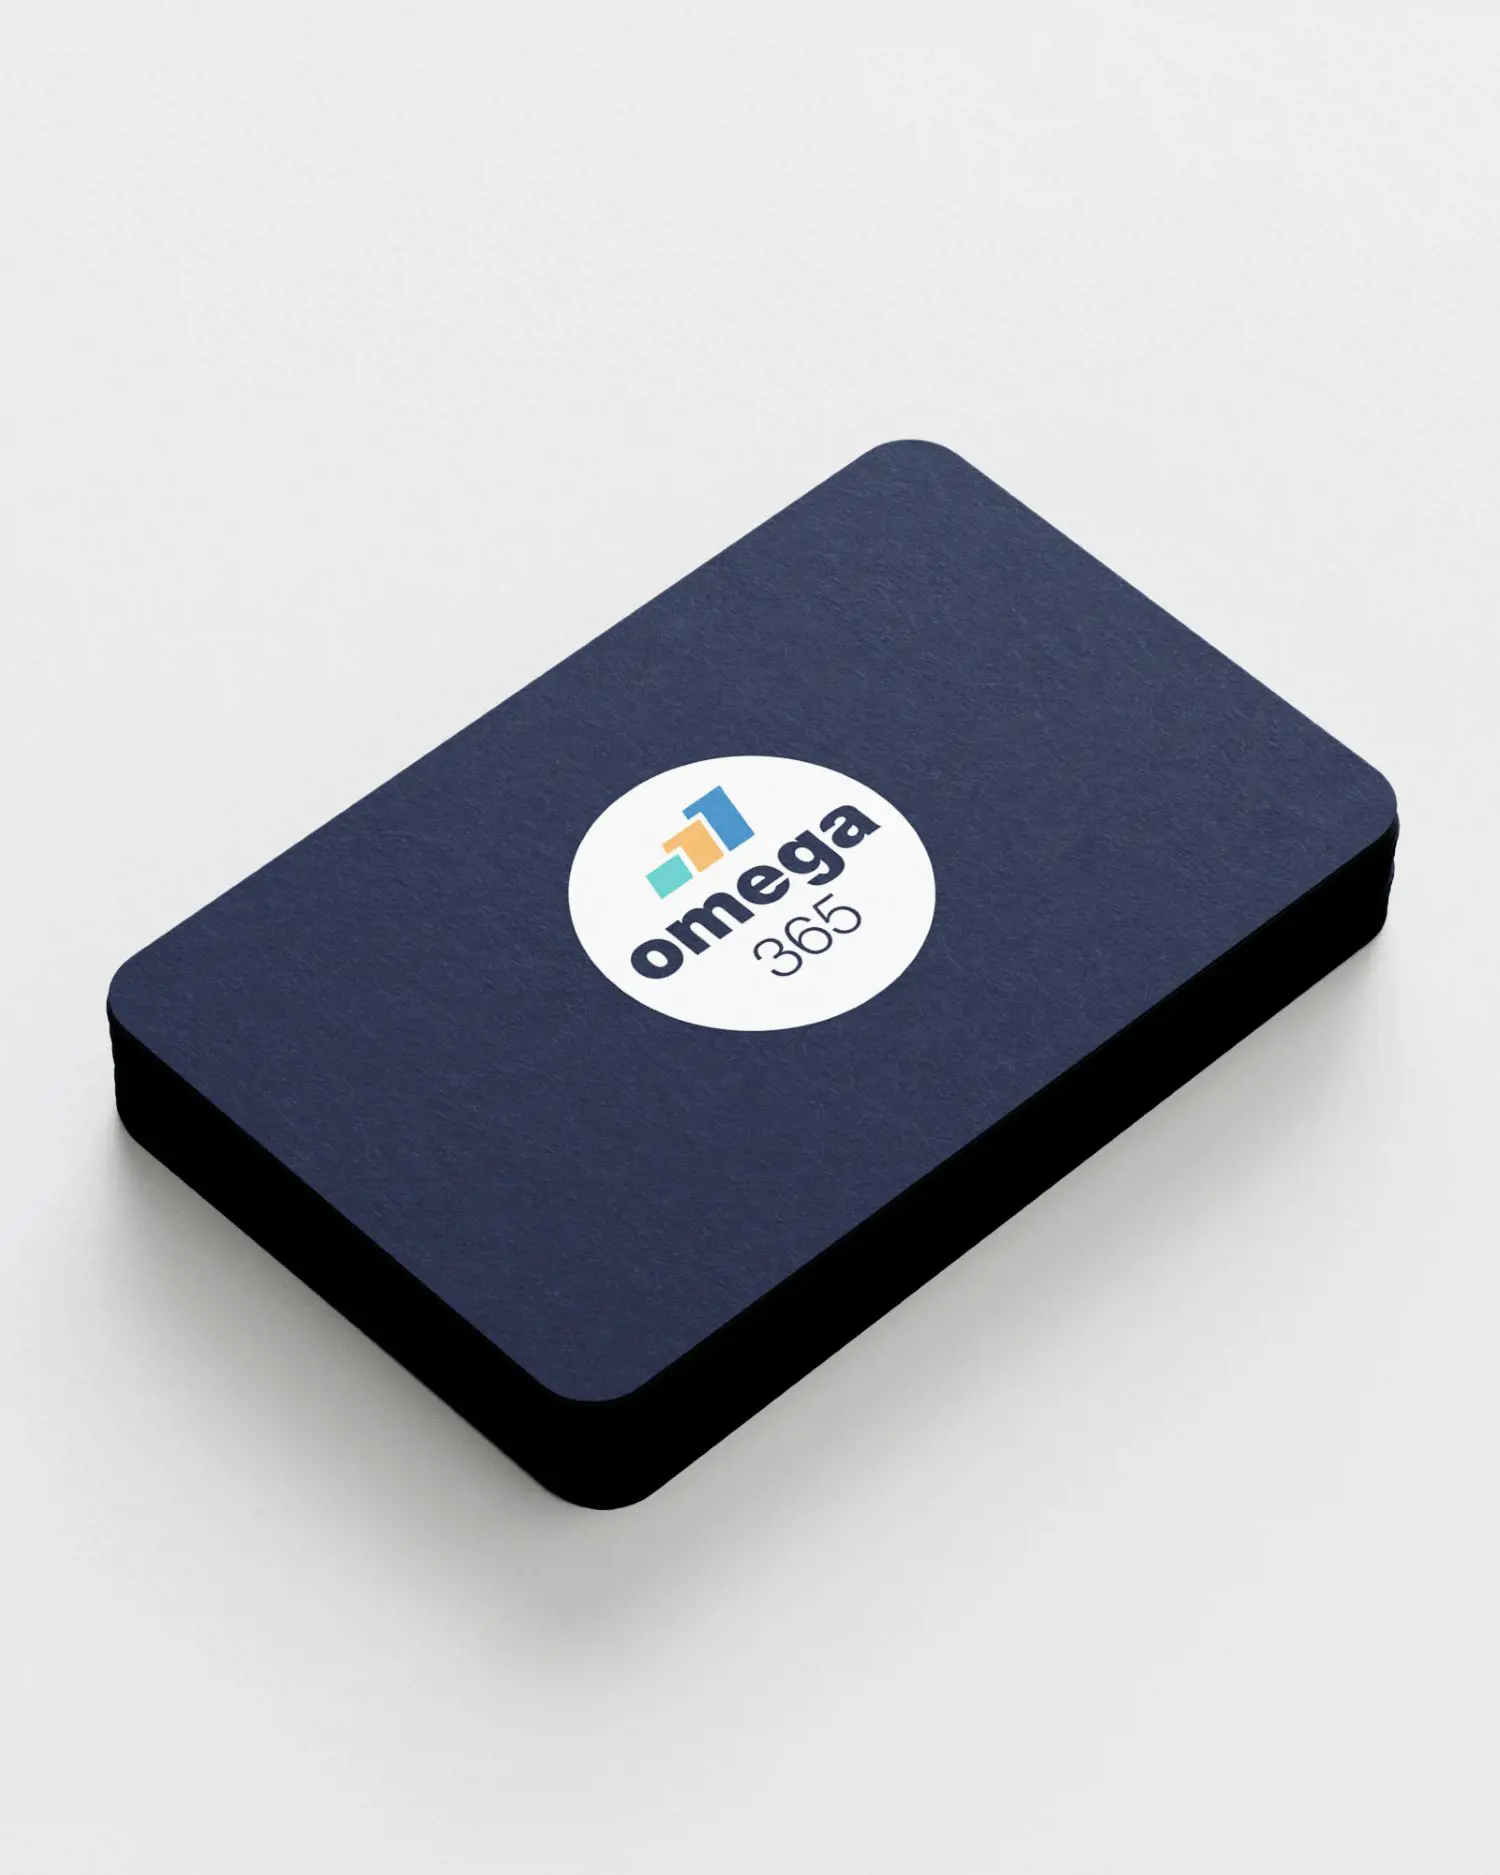 Business card with Omega 365's logo.